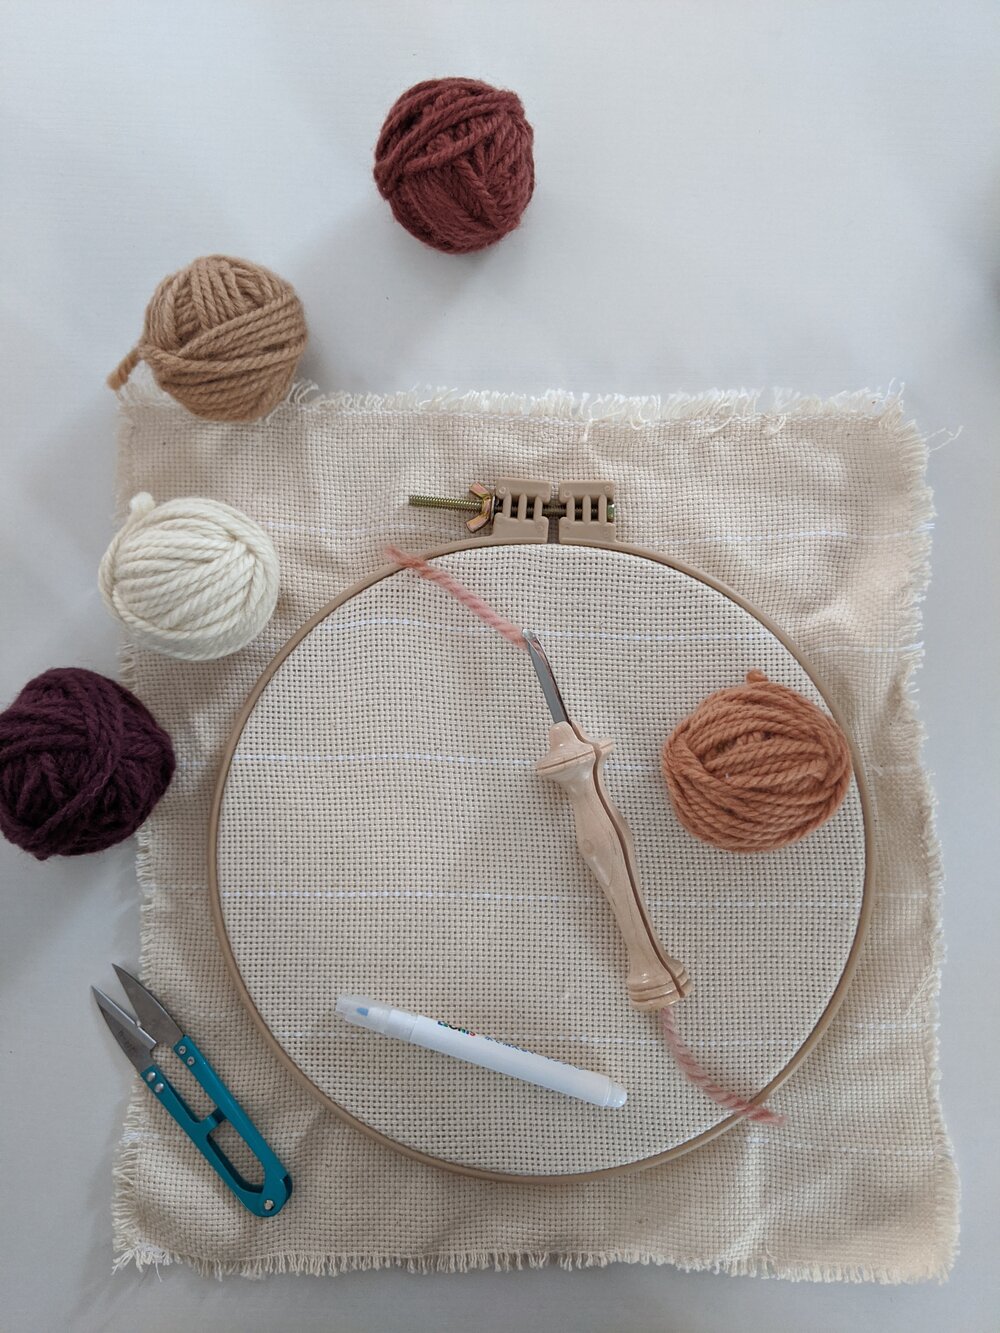 How to make a punch needle frame — Daisy McClellan